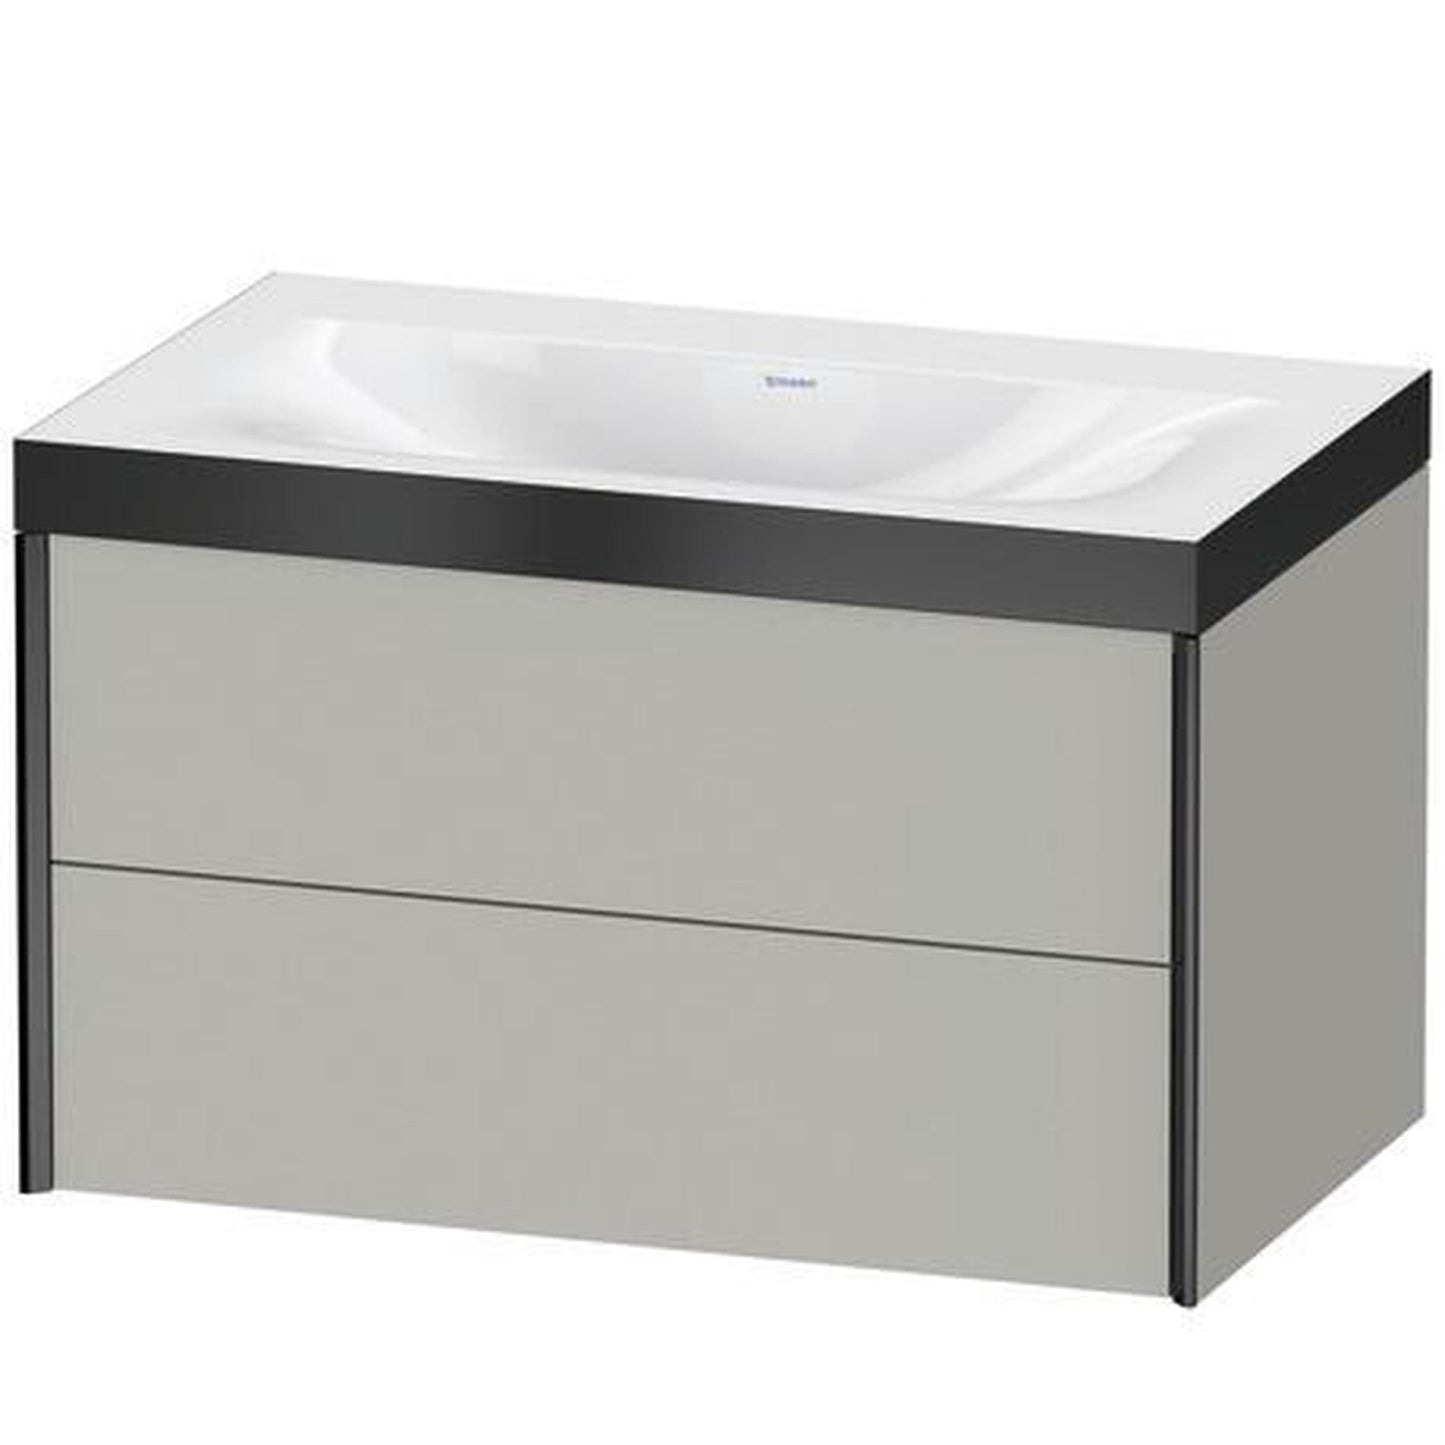 Duravit Xviu 31" x 20" x 19" Two Drawer C-Bonded Wall-Mount Vanity Kit Without Tap Hole, Concrete Gray (XV4615NB207P)